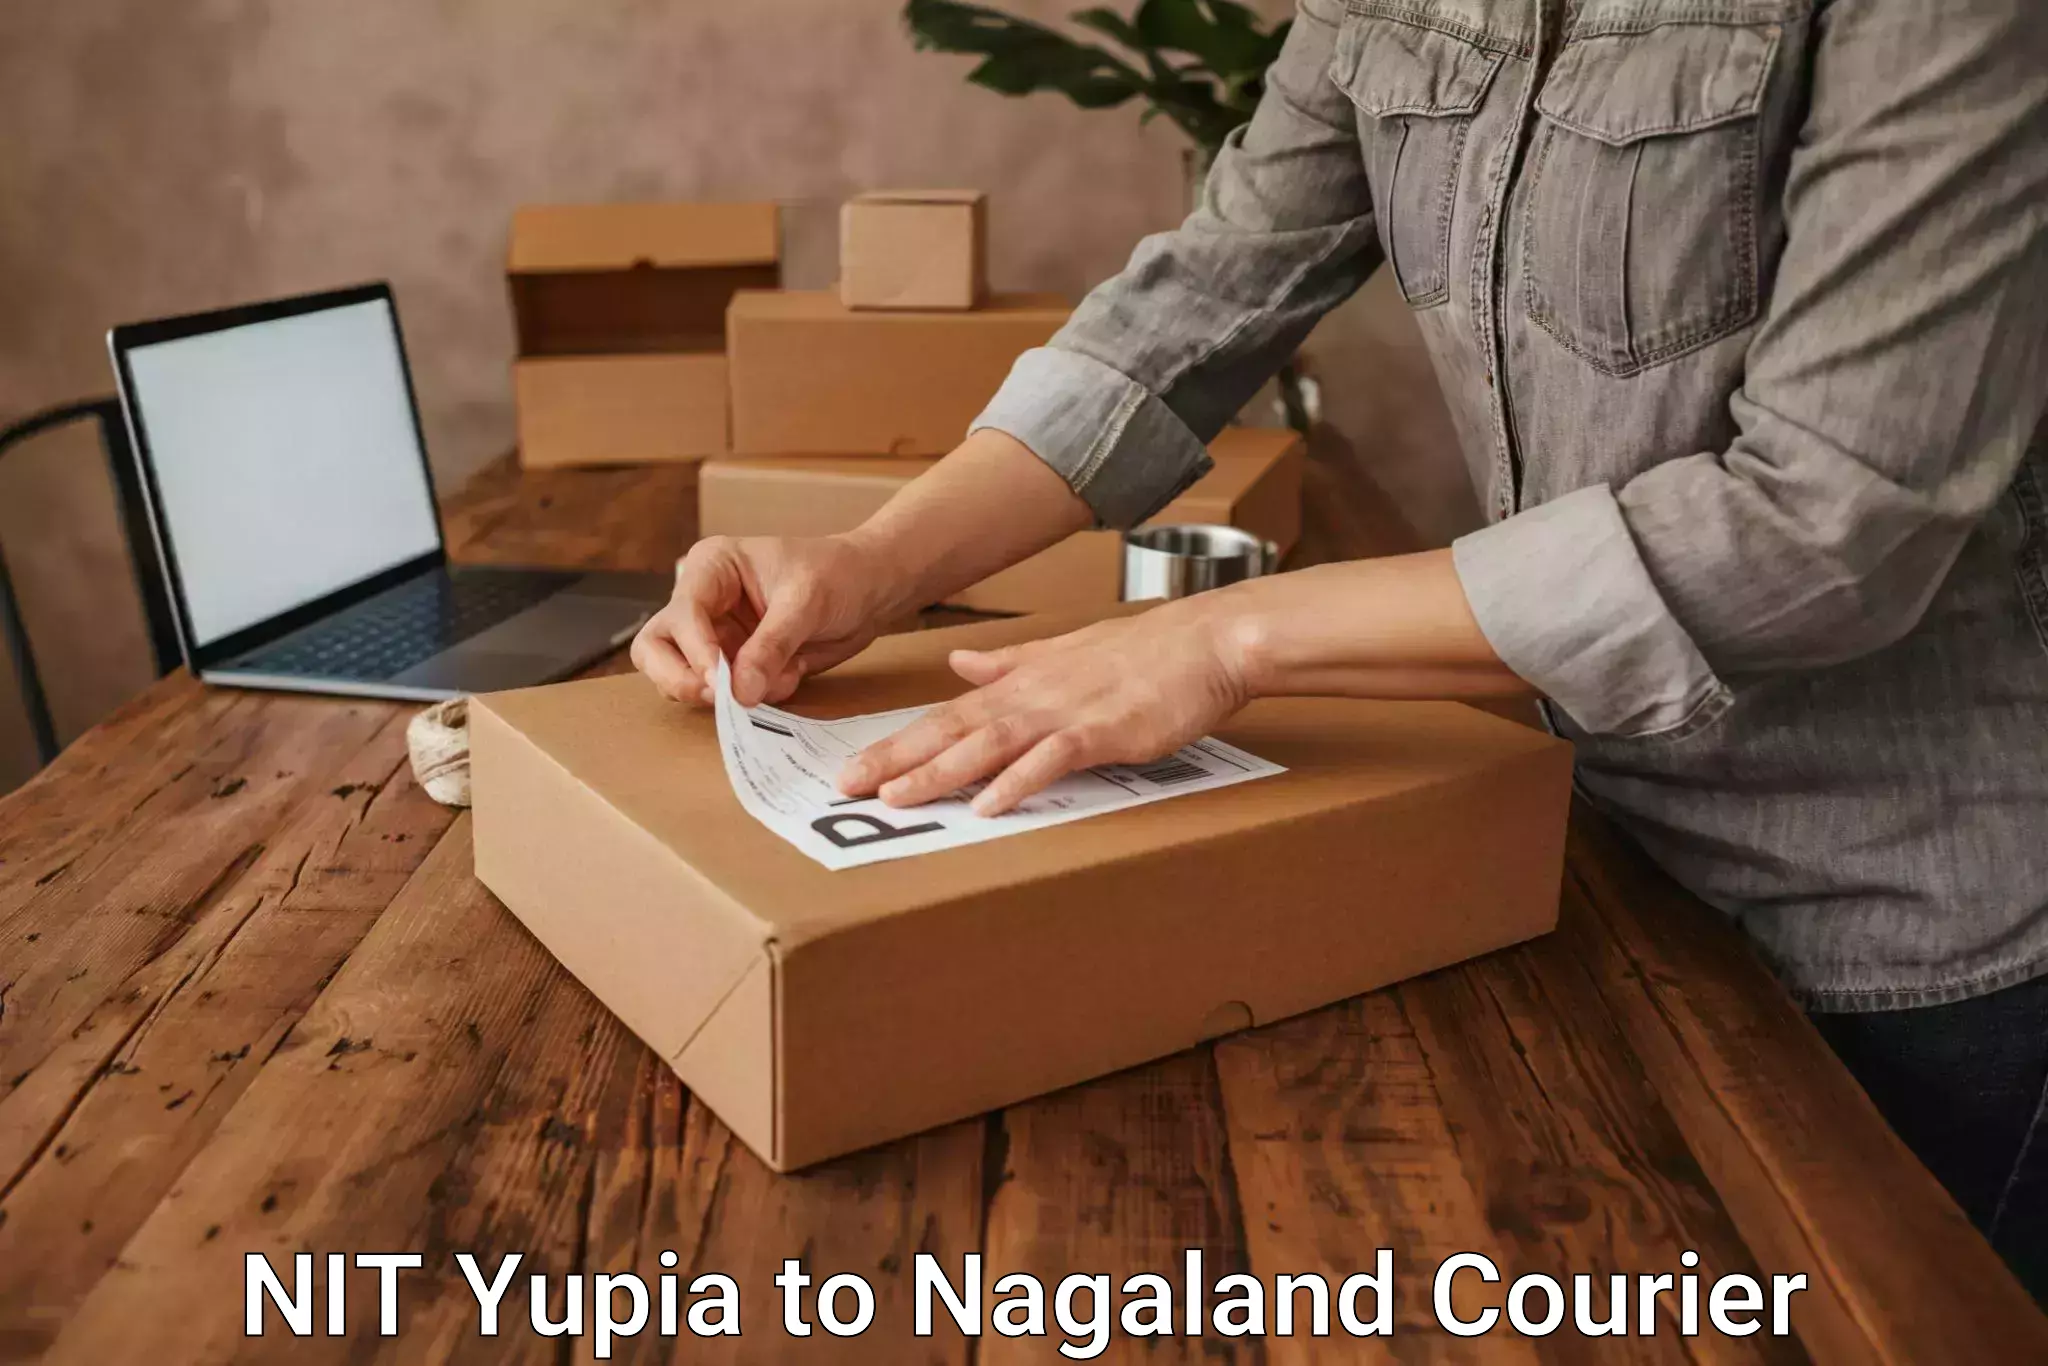 Ocean freight courier NIT Yupia to Nagaland